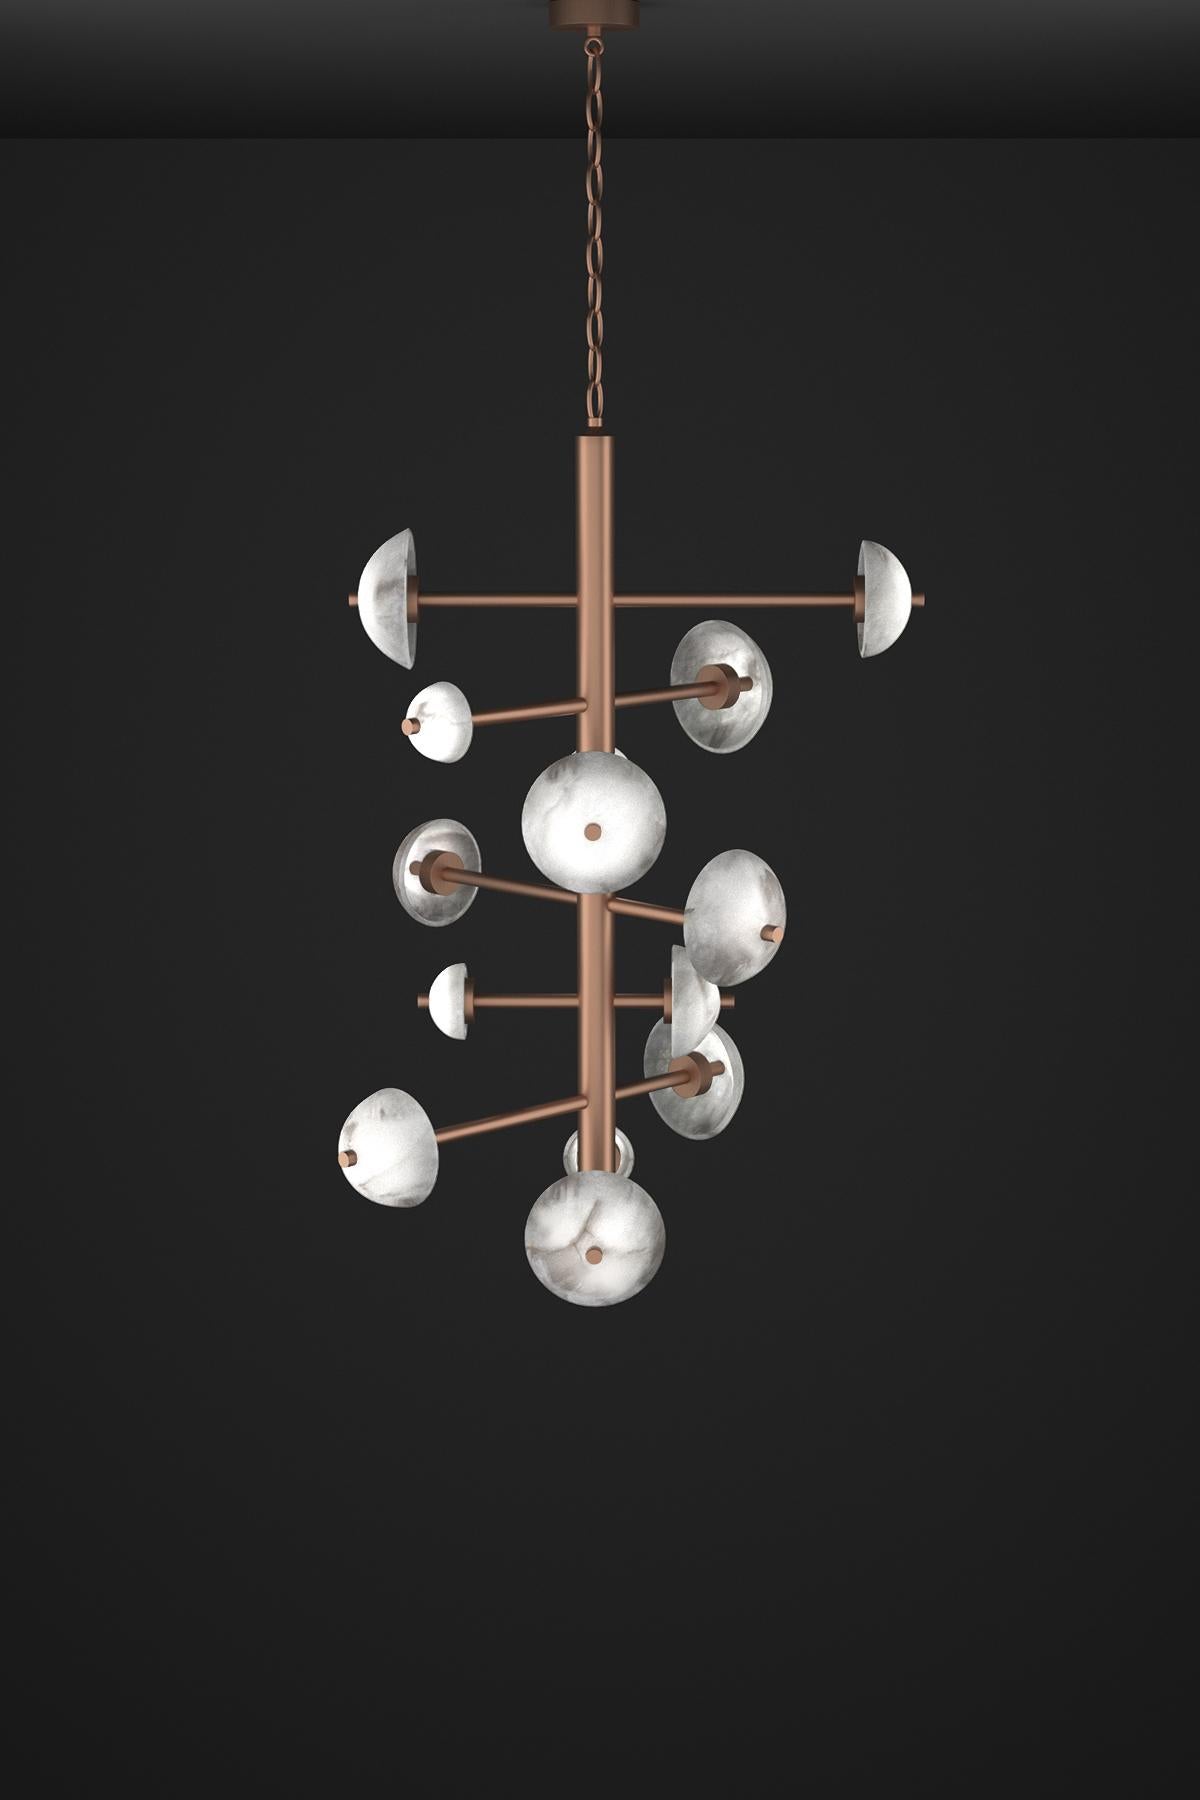 Apollo Copper Chandelier by Alabastro Italiano
Dimensions: D 70,5 x W 55 x H 111 cm.
Materials: White alabaster and copper.

Available in different finishes: Shiny Silver, Bronze, Brushed Brass, Ruggine of Florence, Brushed Burnished, Shiny Gold,